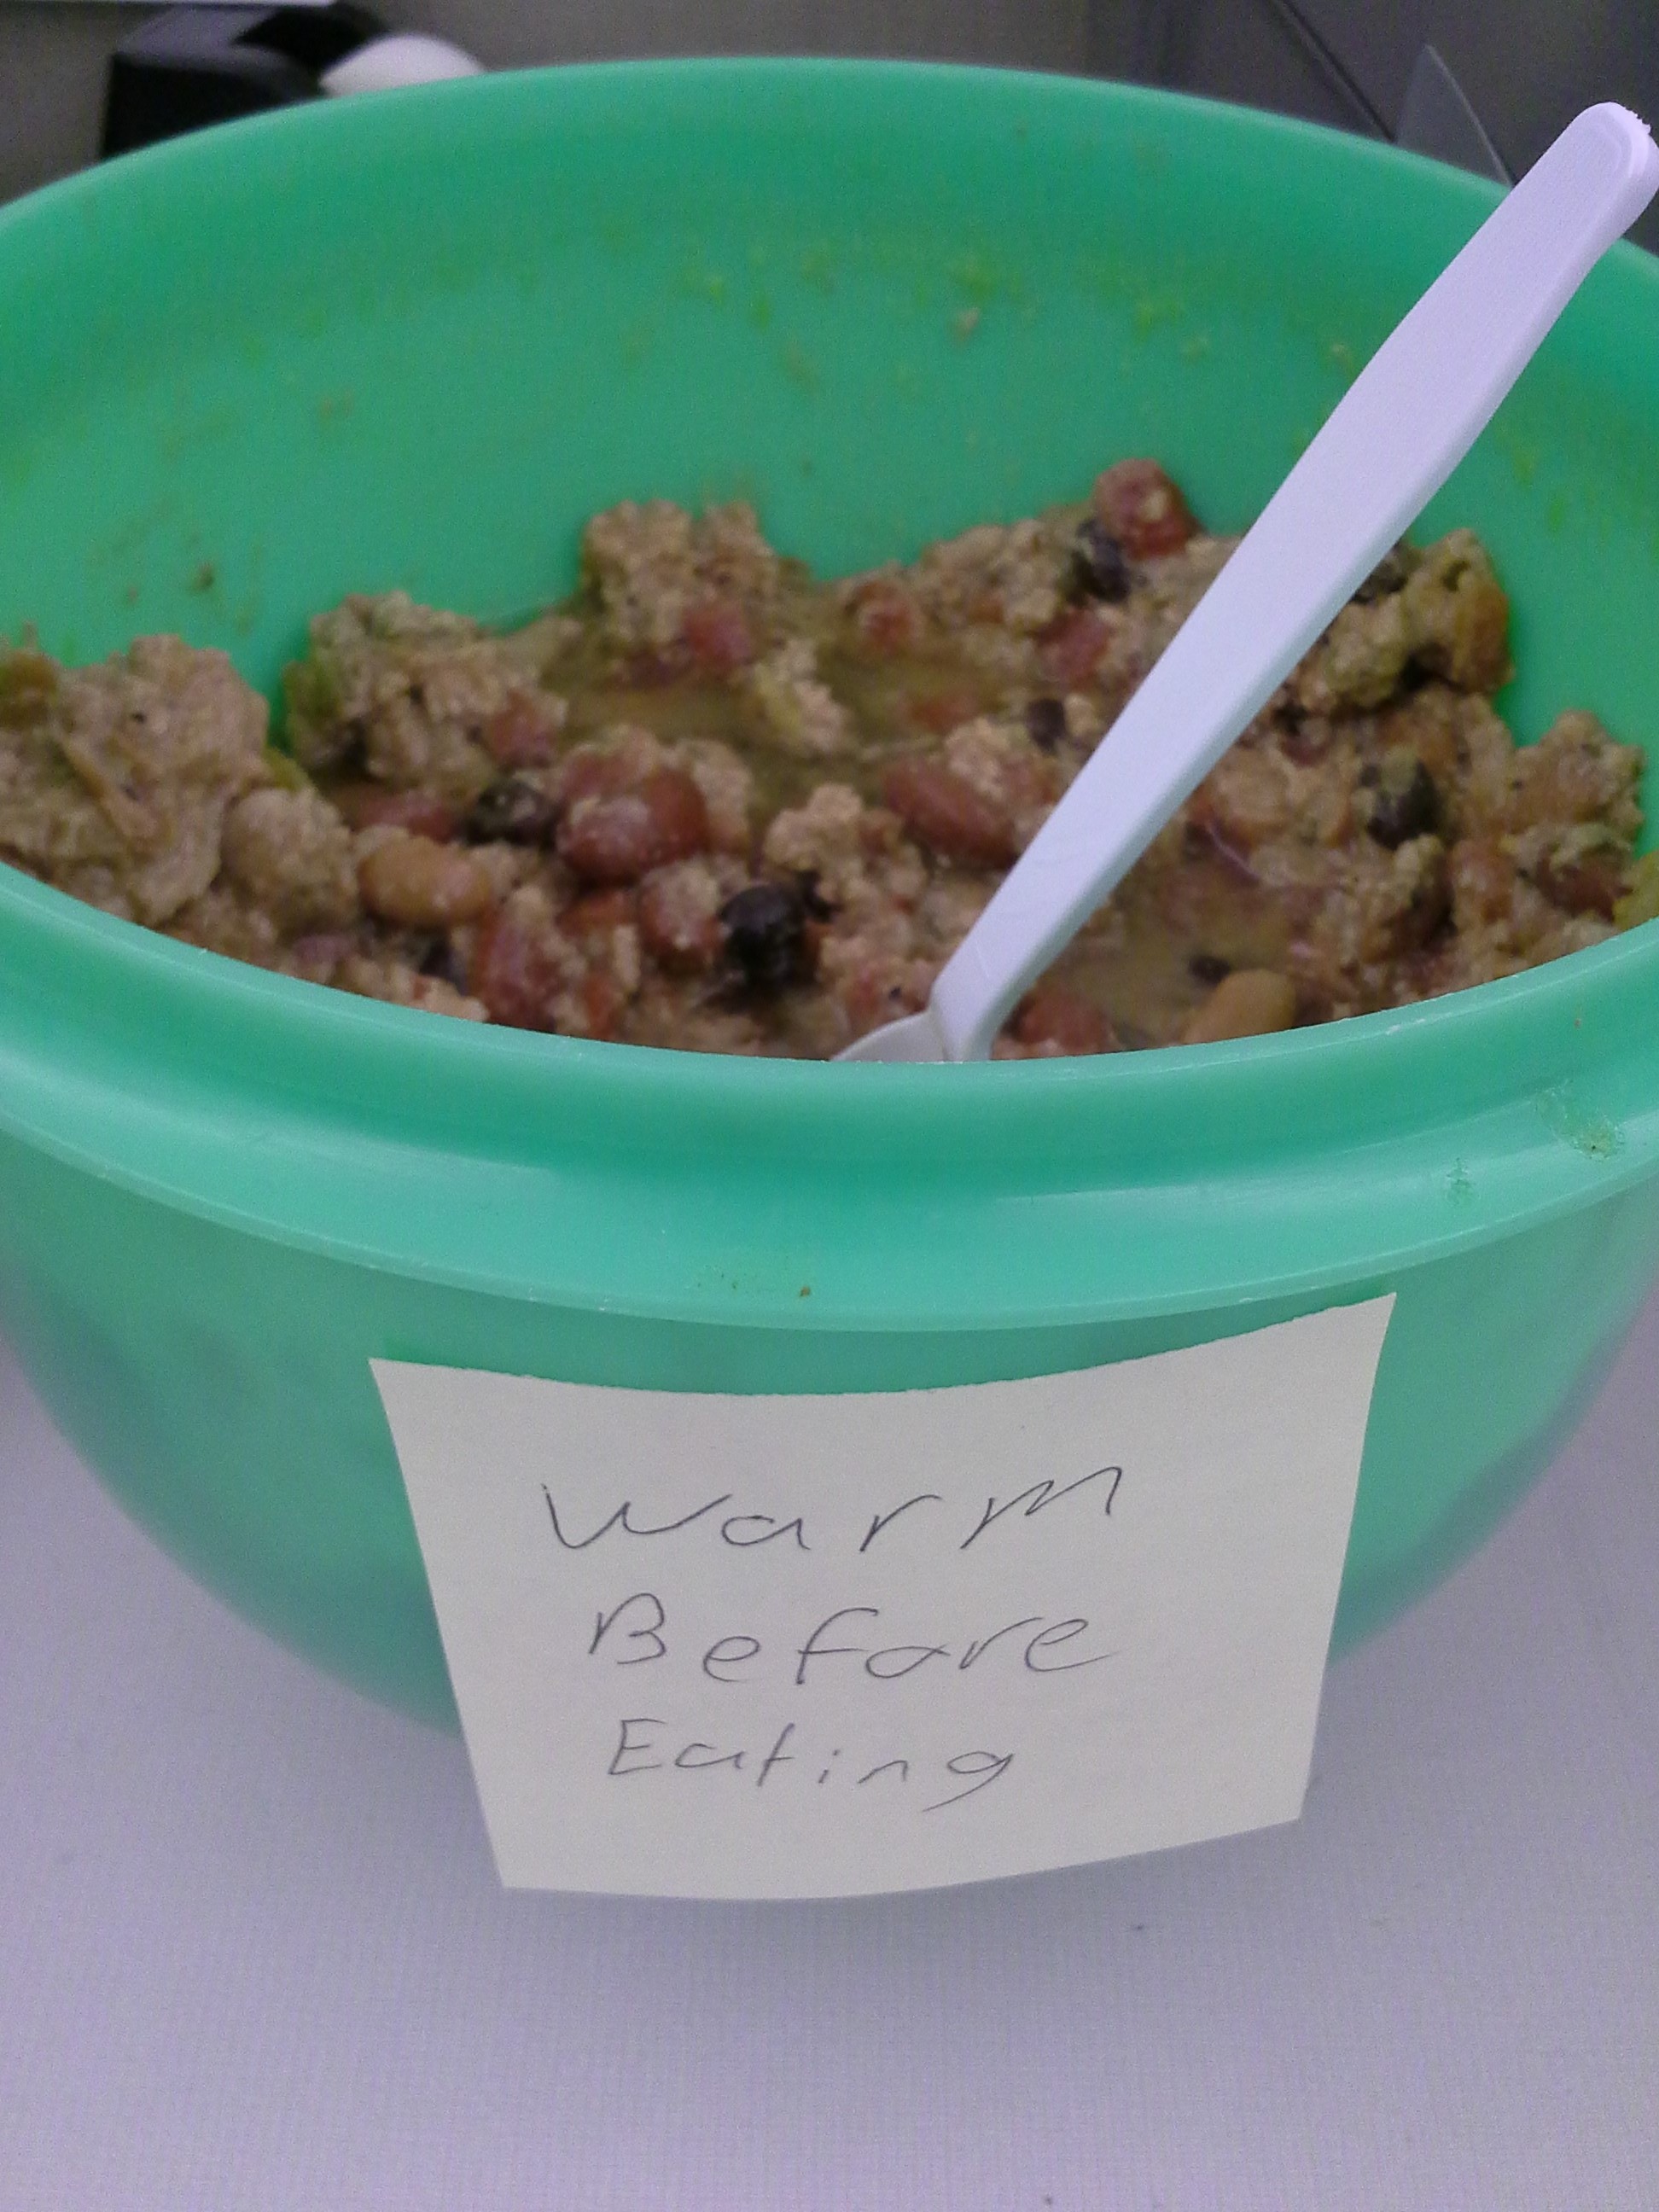 bright green bowl full of beans and meat chunks or something. looks like a food nightmare